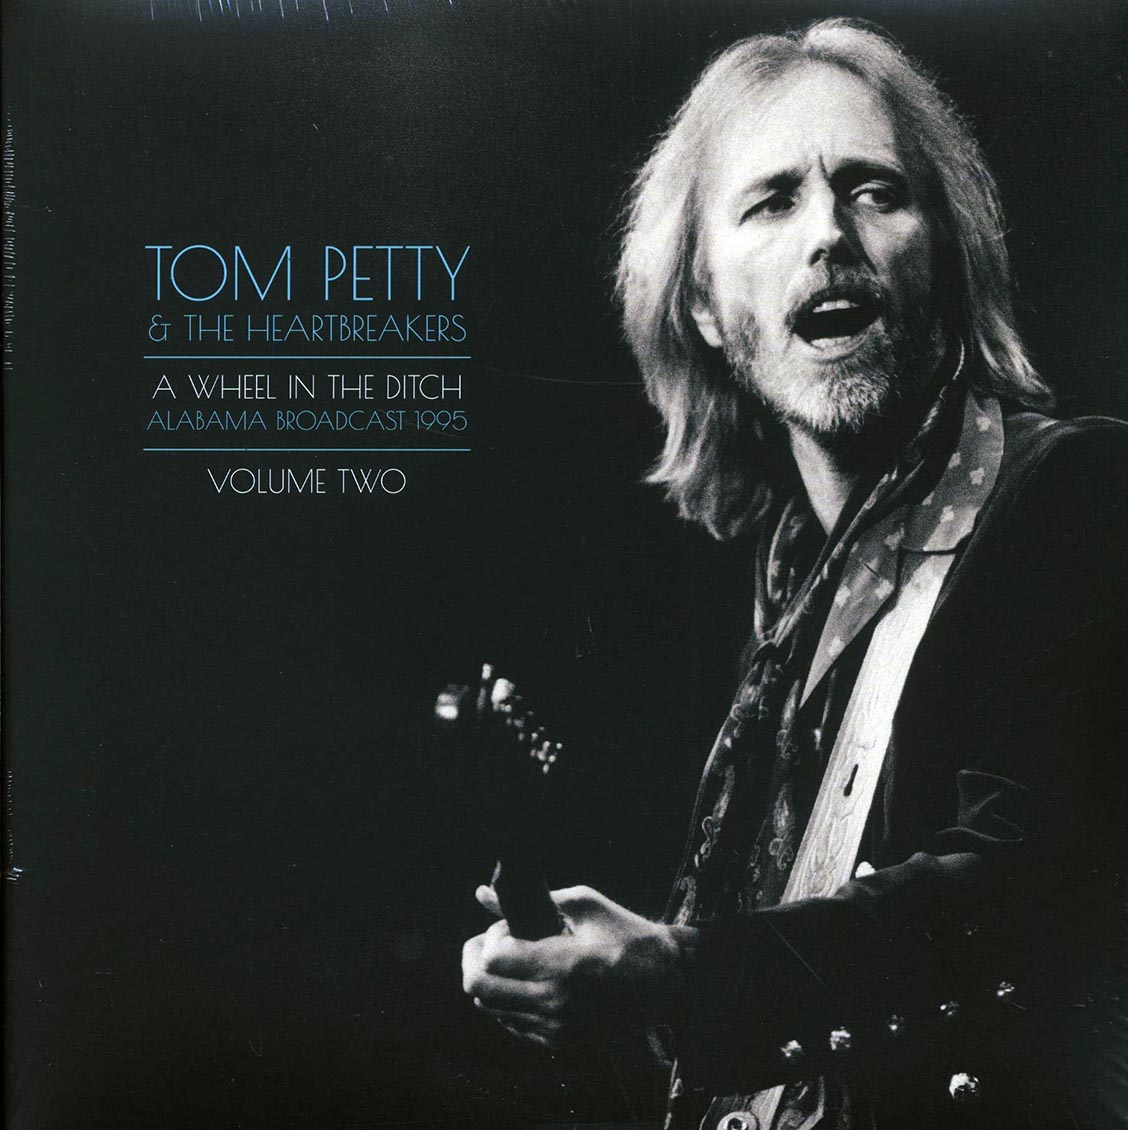 Tom Petty & The Heartbreakers - A Wheel In The Ditch Volume 2: Alabama Broadcast 1995